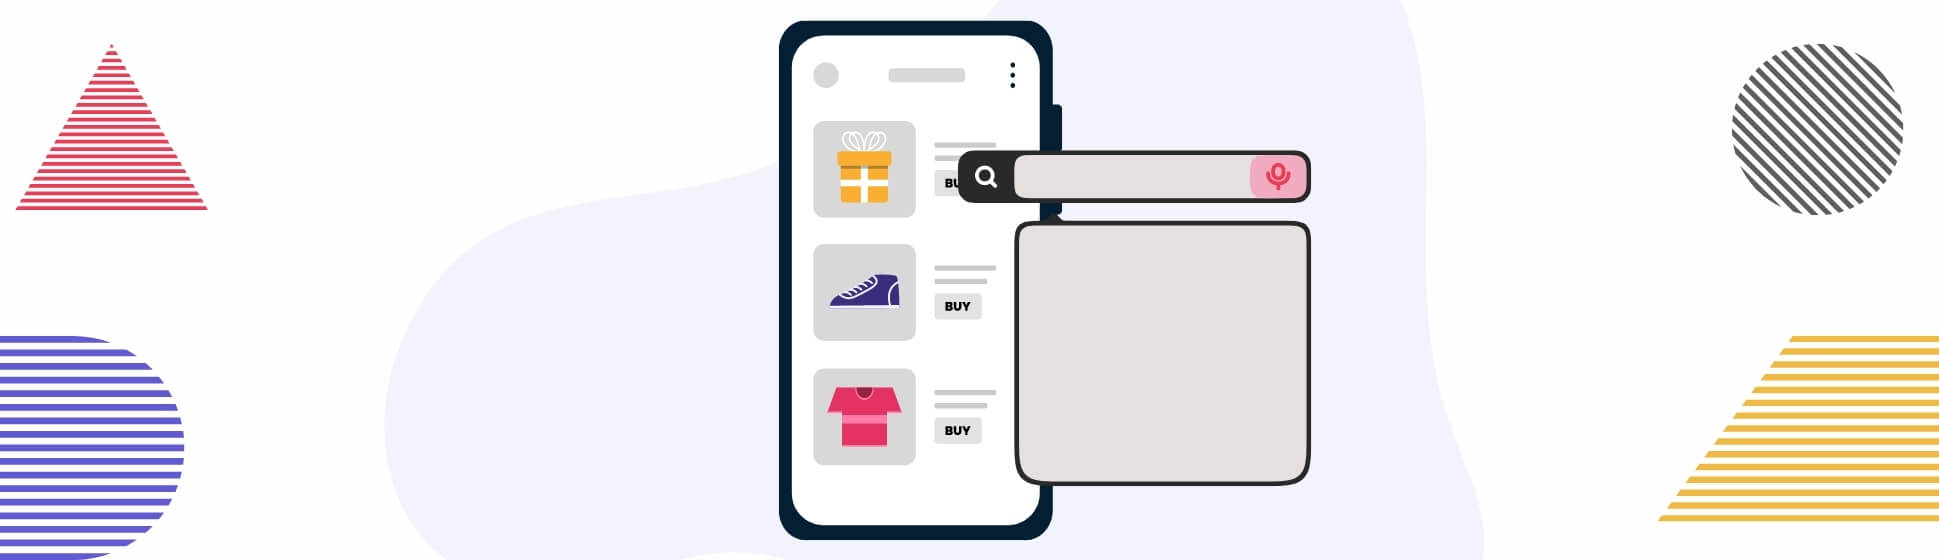 9 E-Commerce Search Bar Designs: Implement the best for your site.